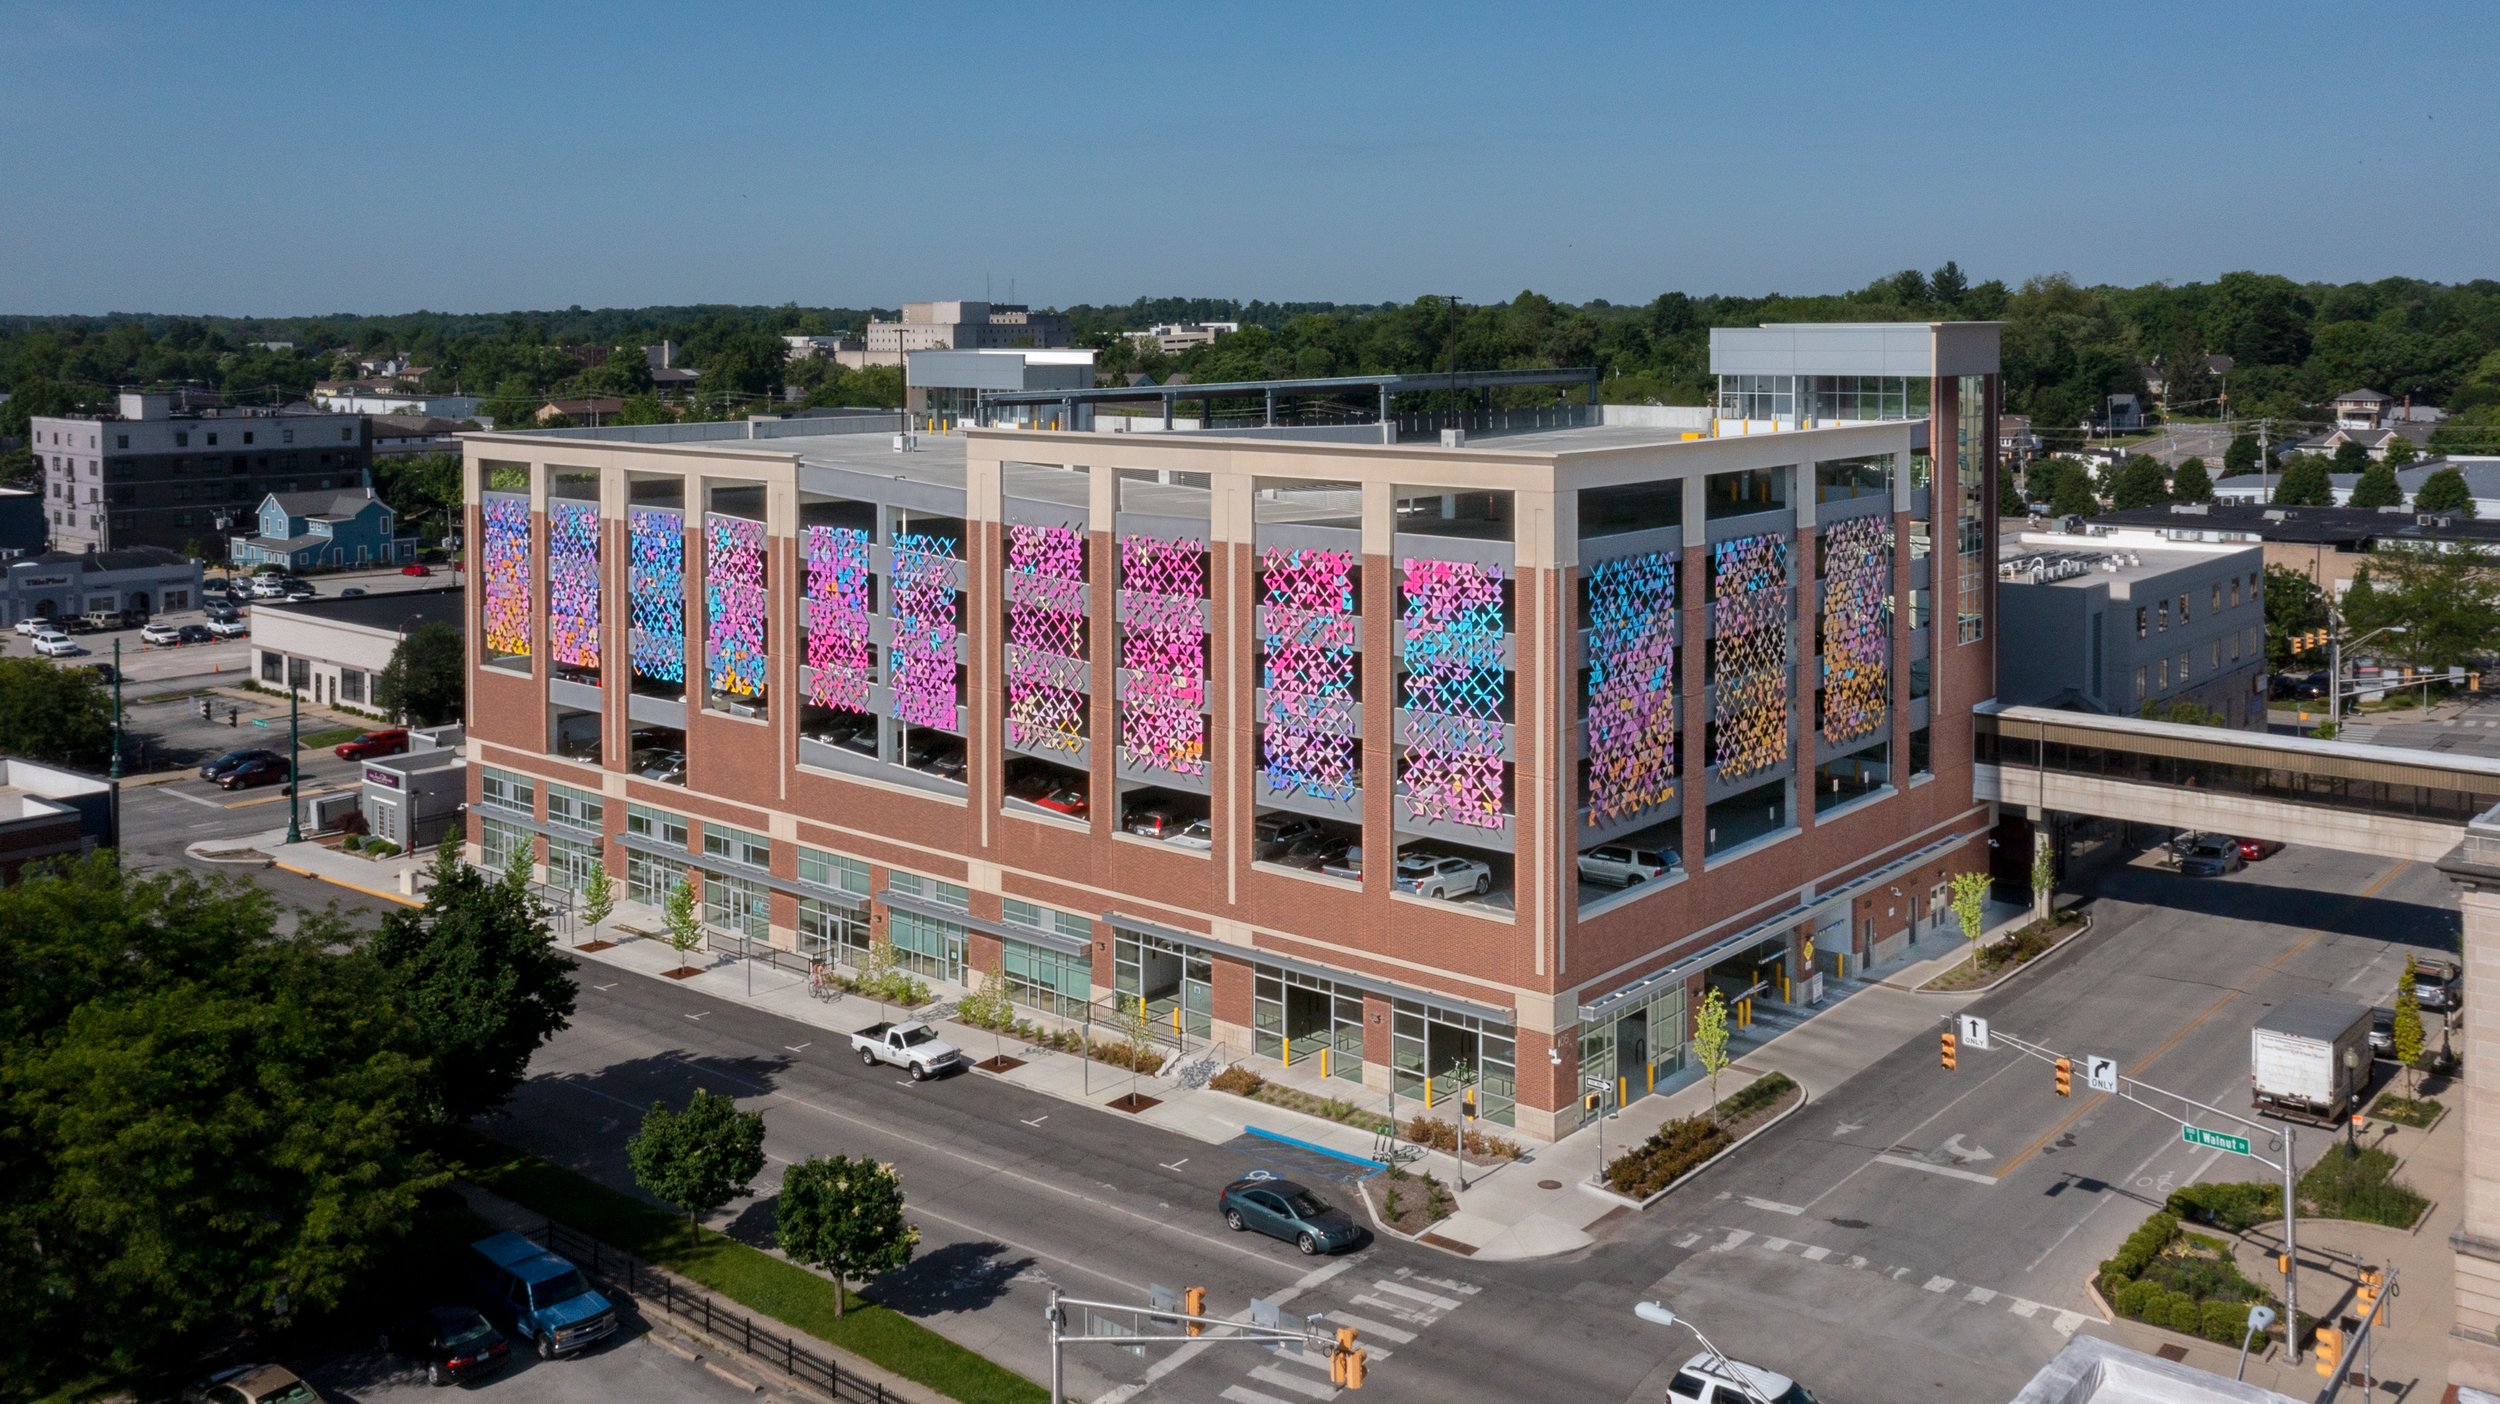 An aerial view photography by Al Ensley of a parking garage in the local community.